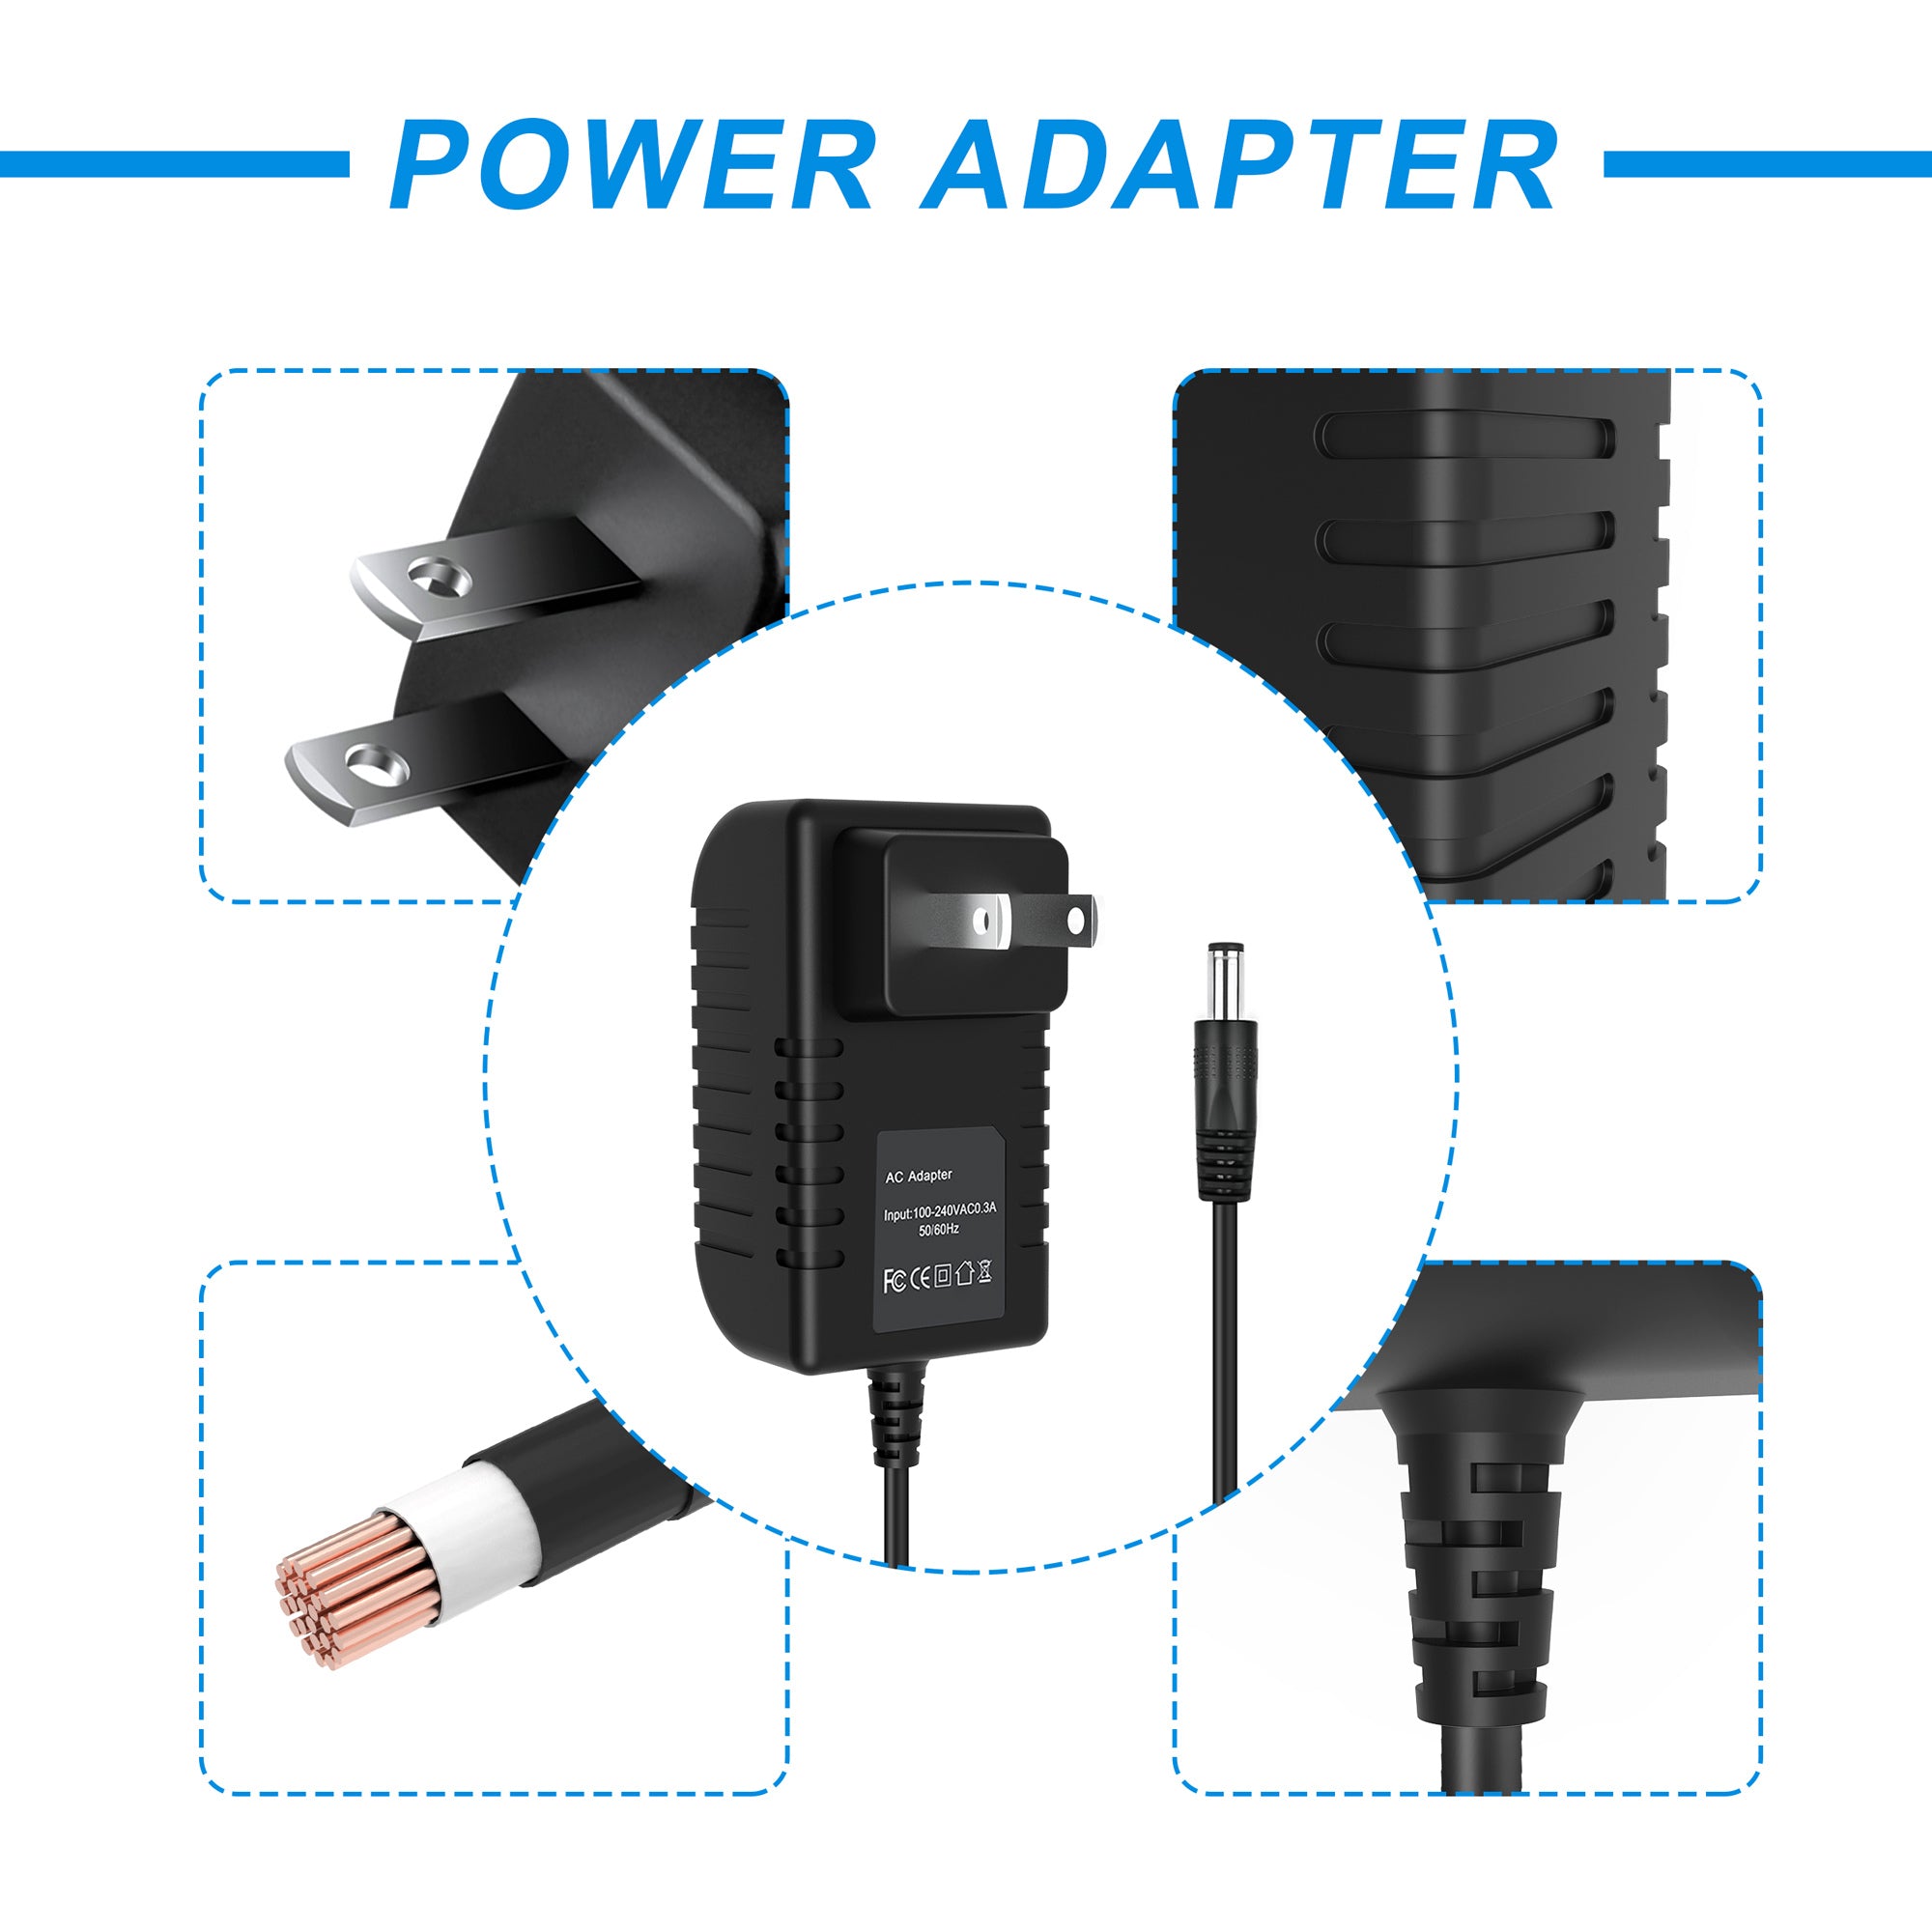 AbleGrid AC Adapter Compatible with Cybex TR-13019 TR-13018 Recumbent Exercise Bike Power Supply Cord